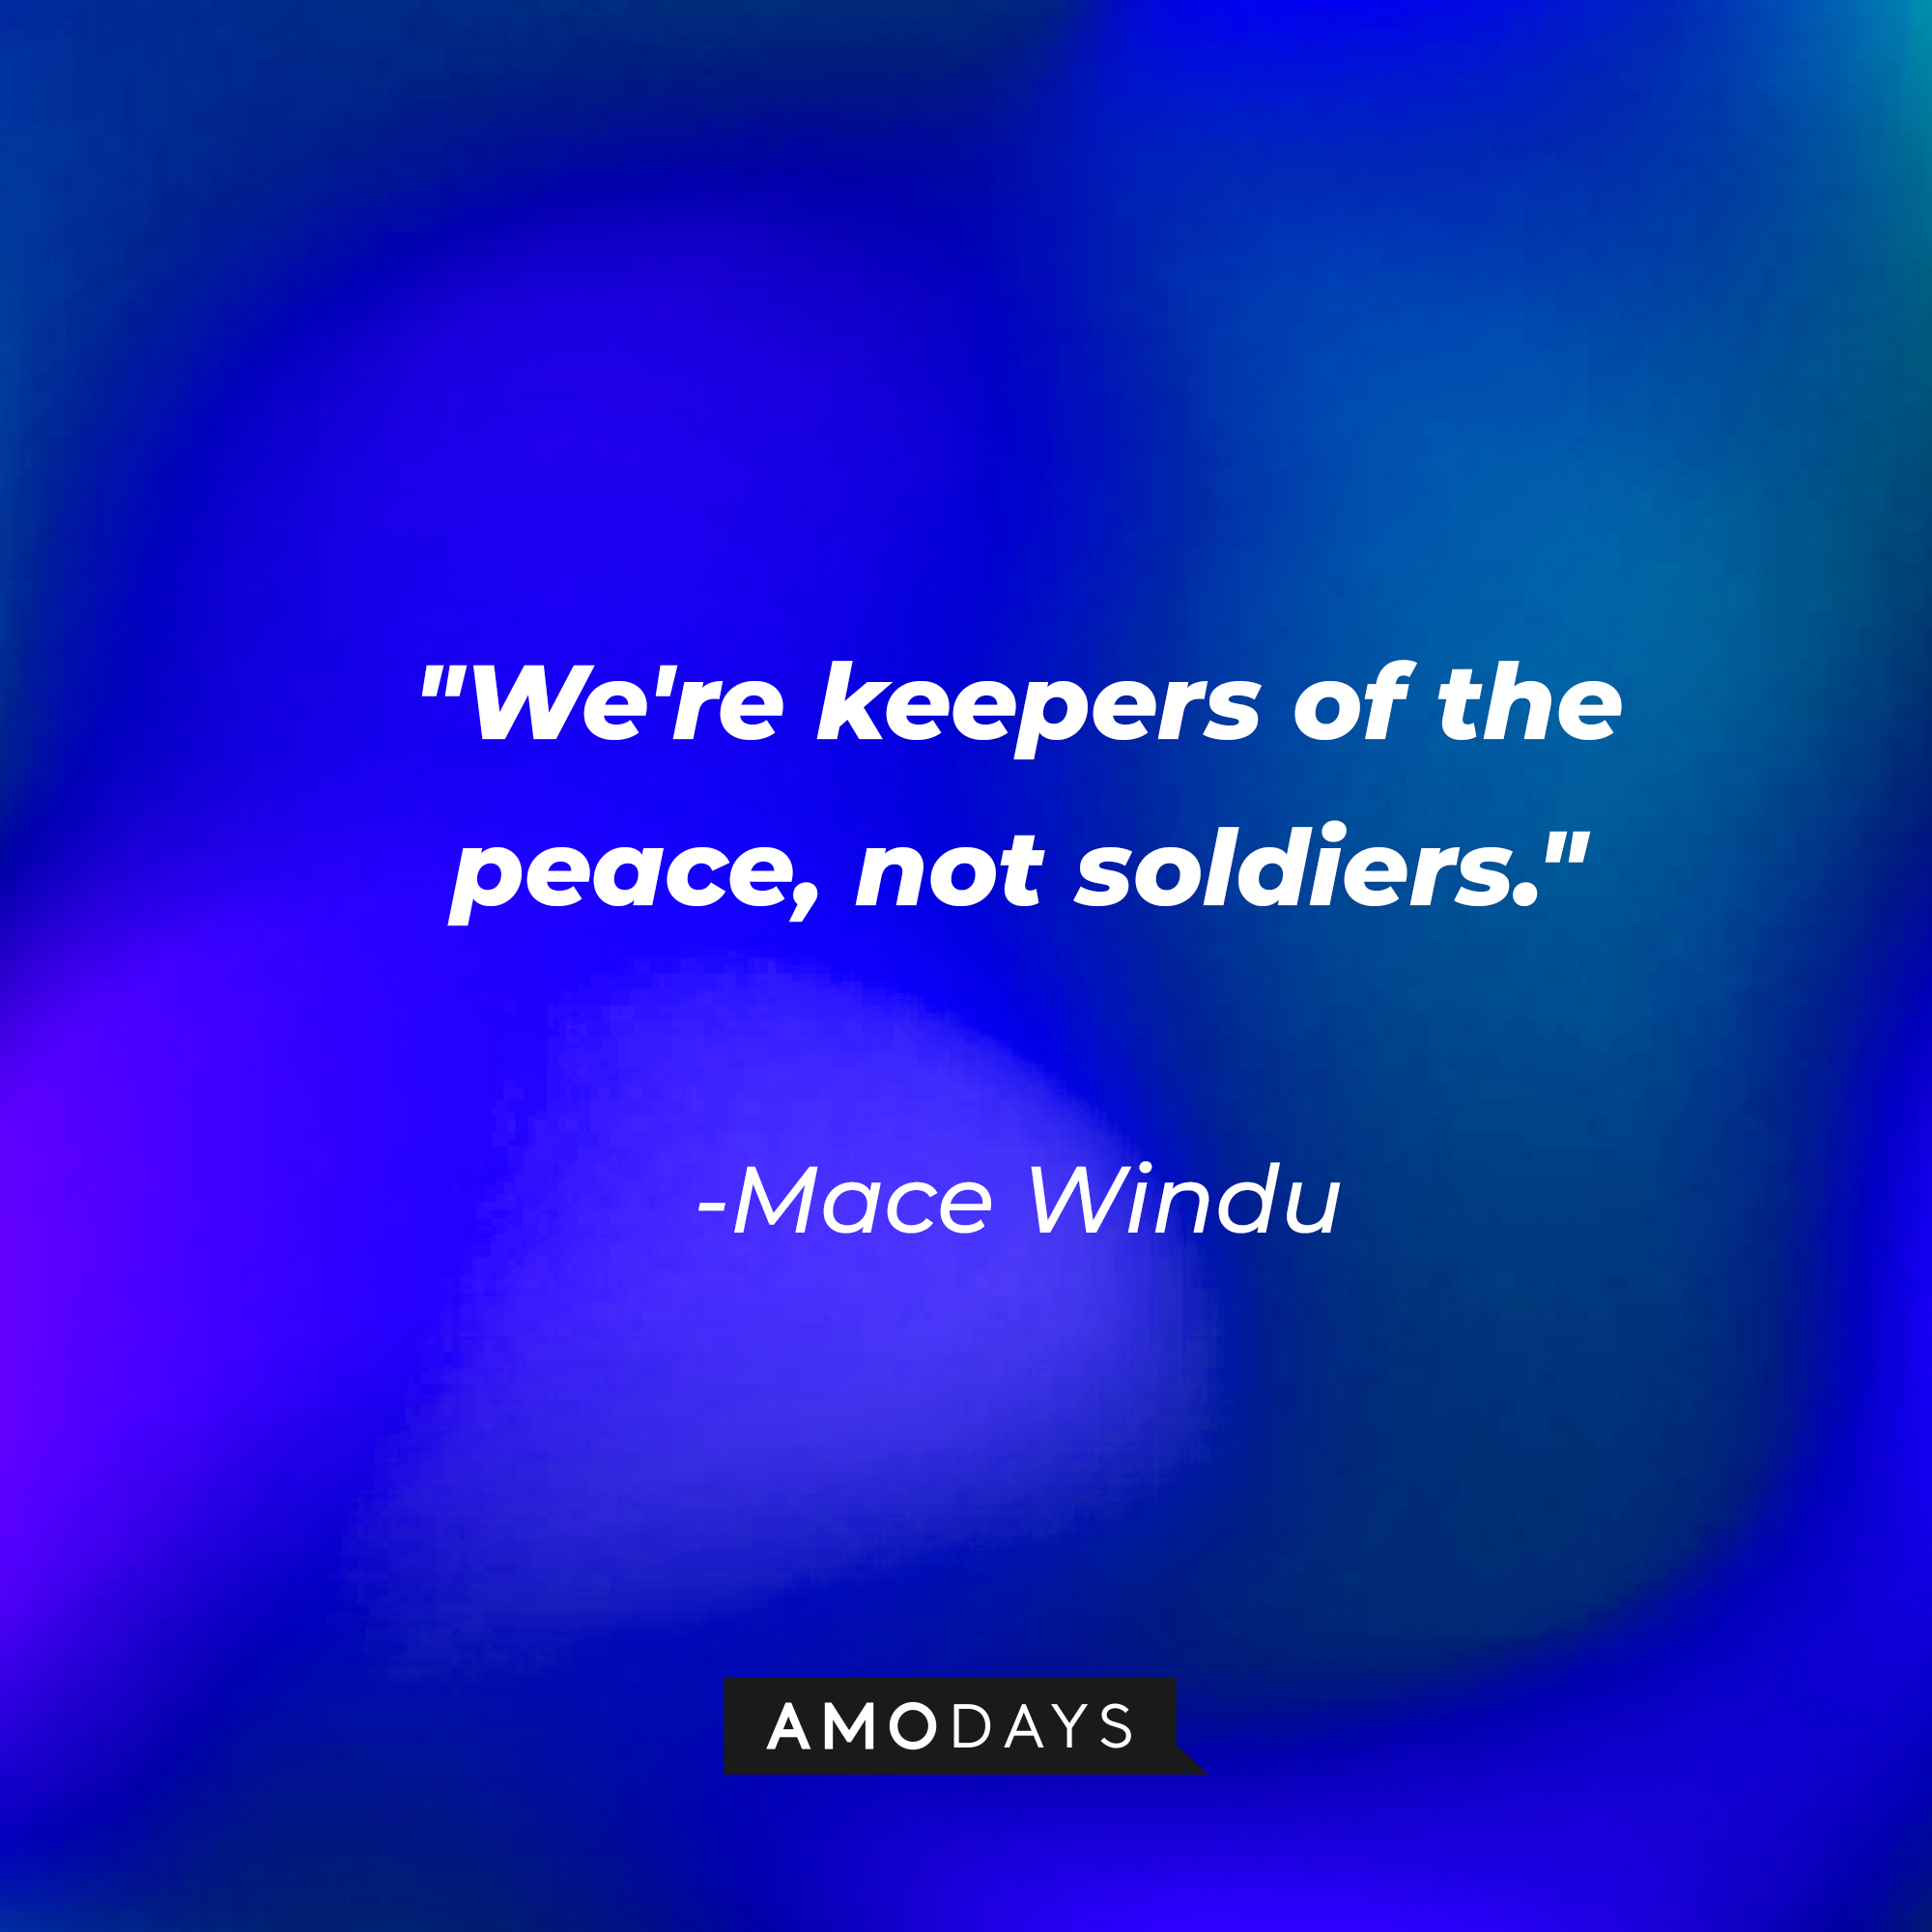 Mace Windu's quote: "We're keepers of the peace, not soldiers." | Source: AmoDays